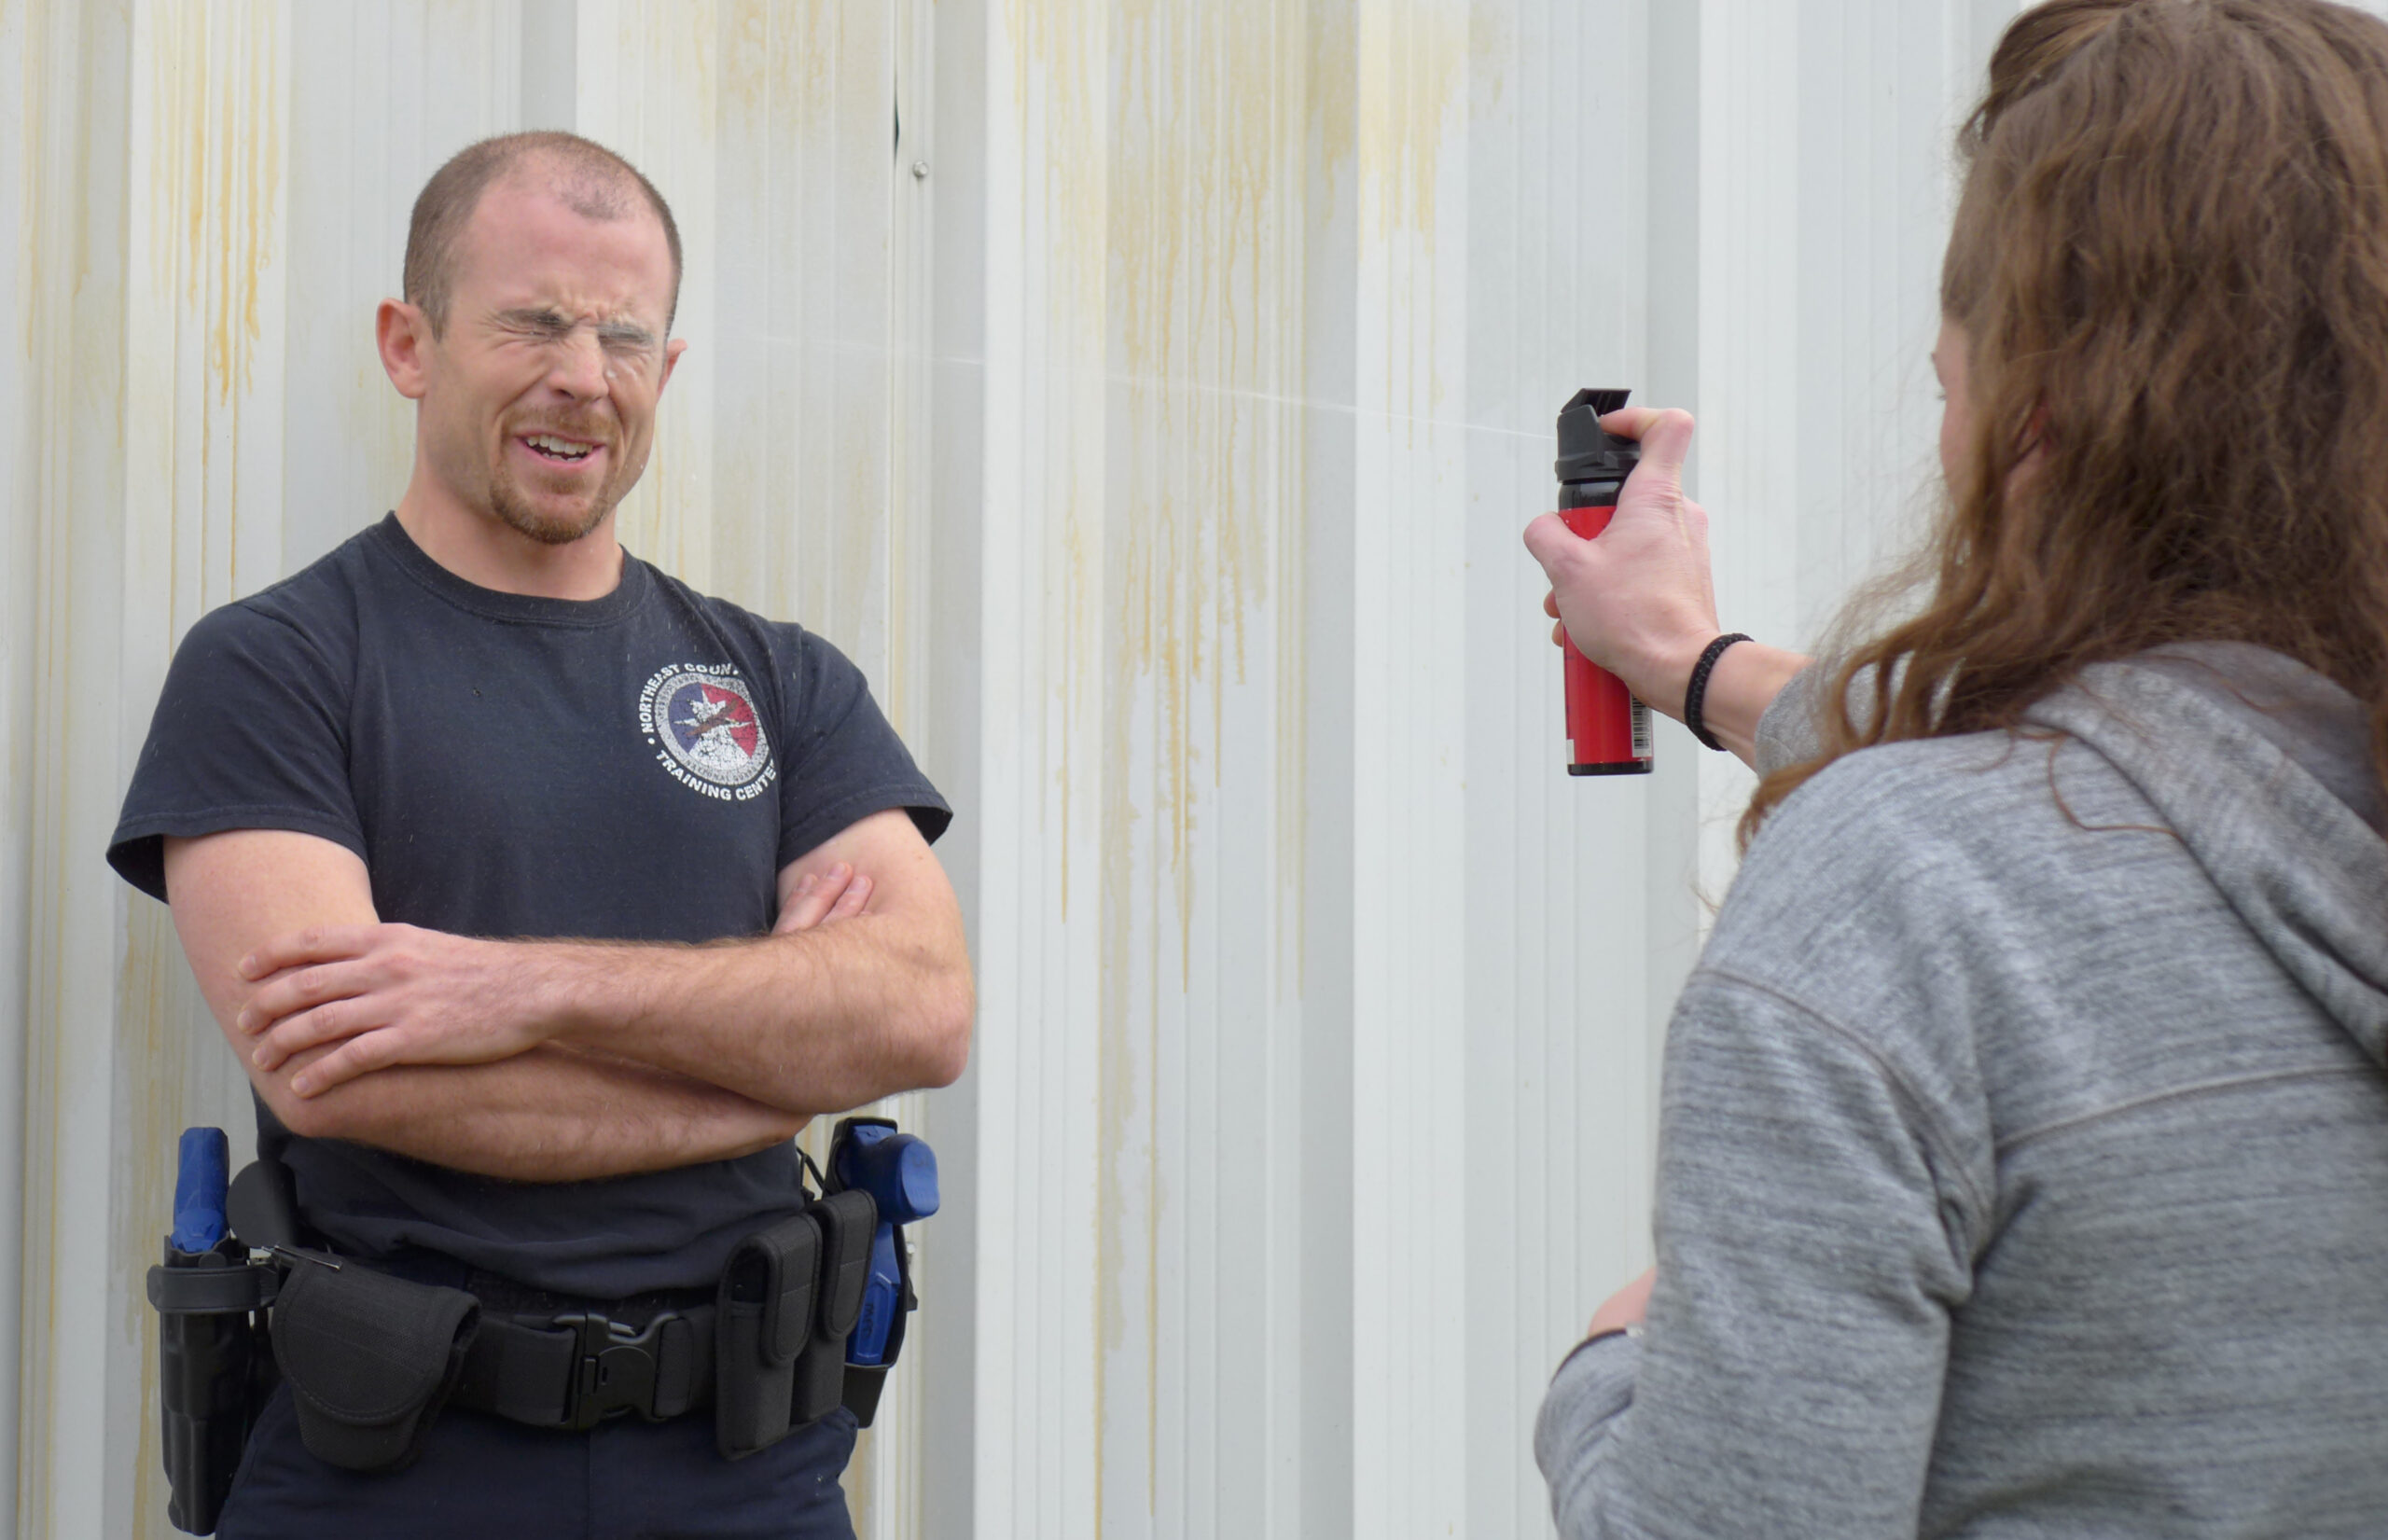 Recruit Nick Cleary is sprayed with pepper spray during training at the Madison Police Training Center.